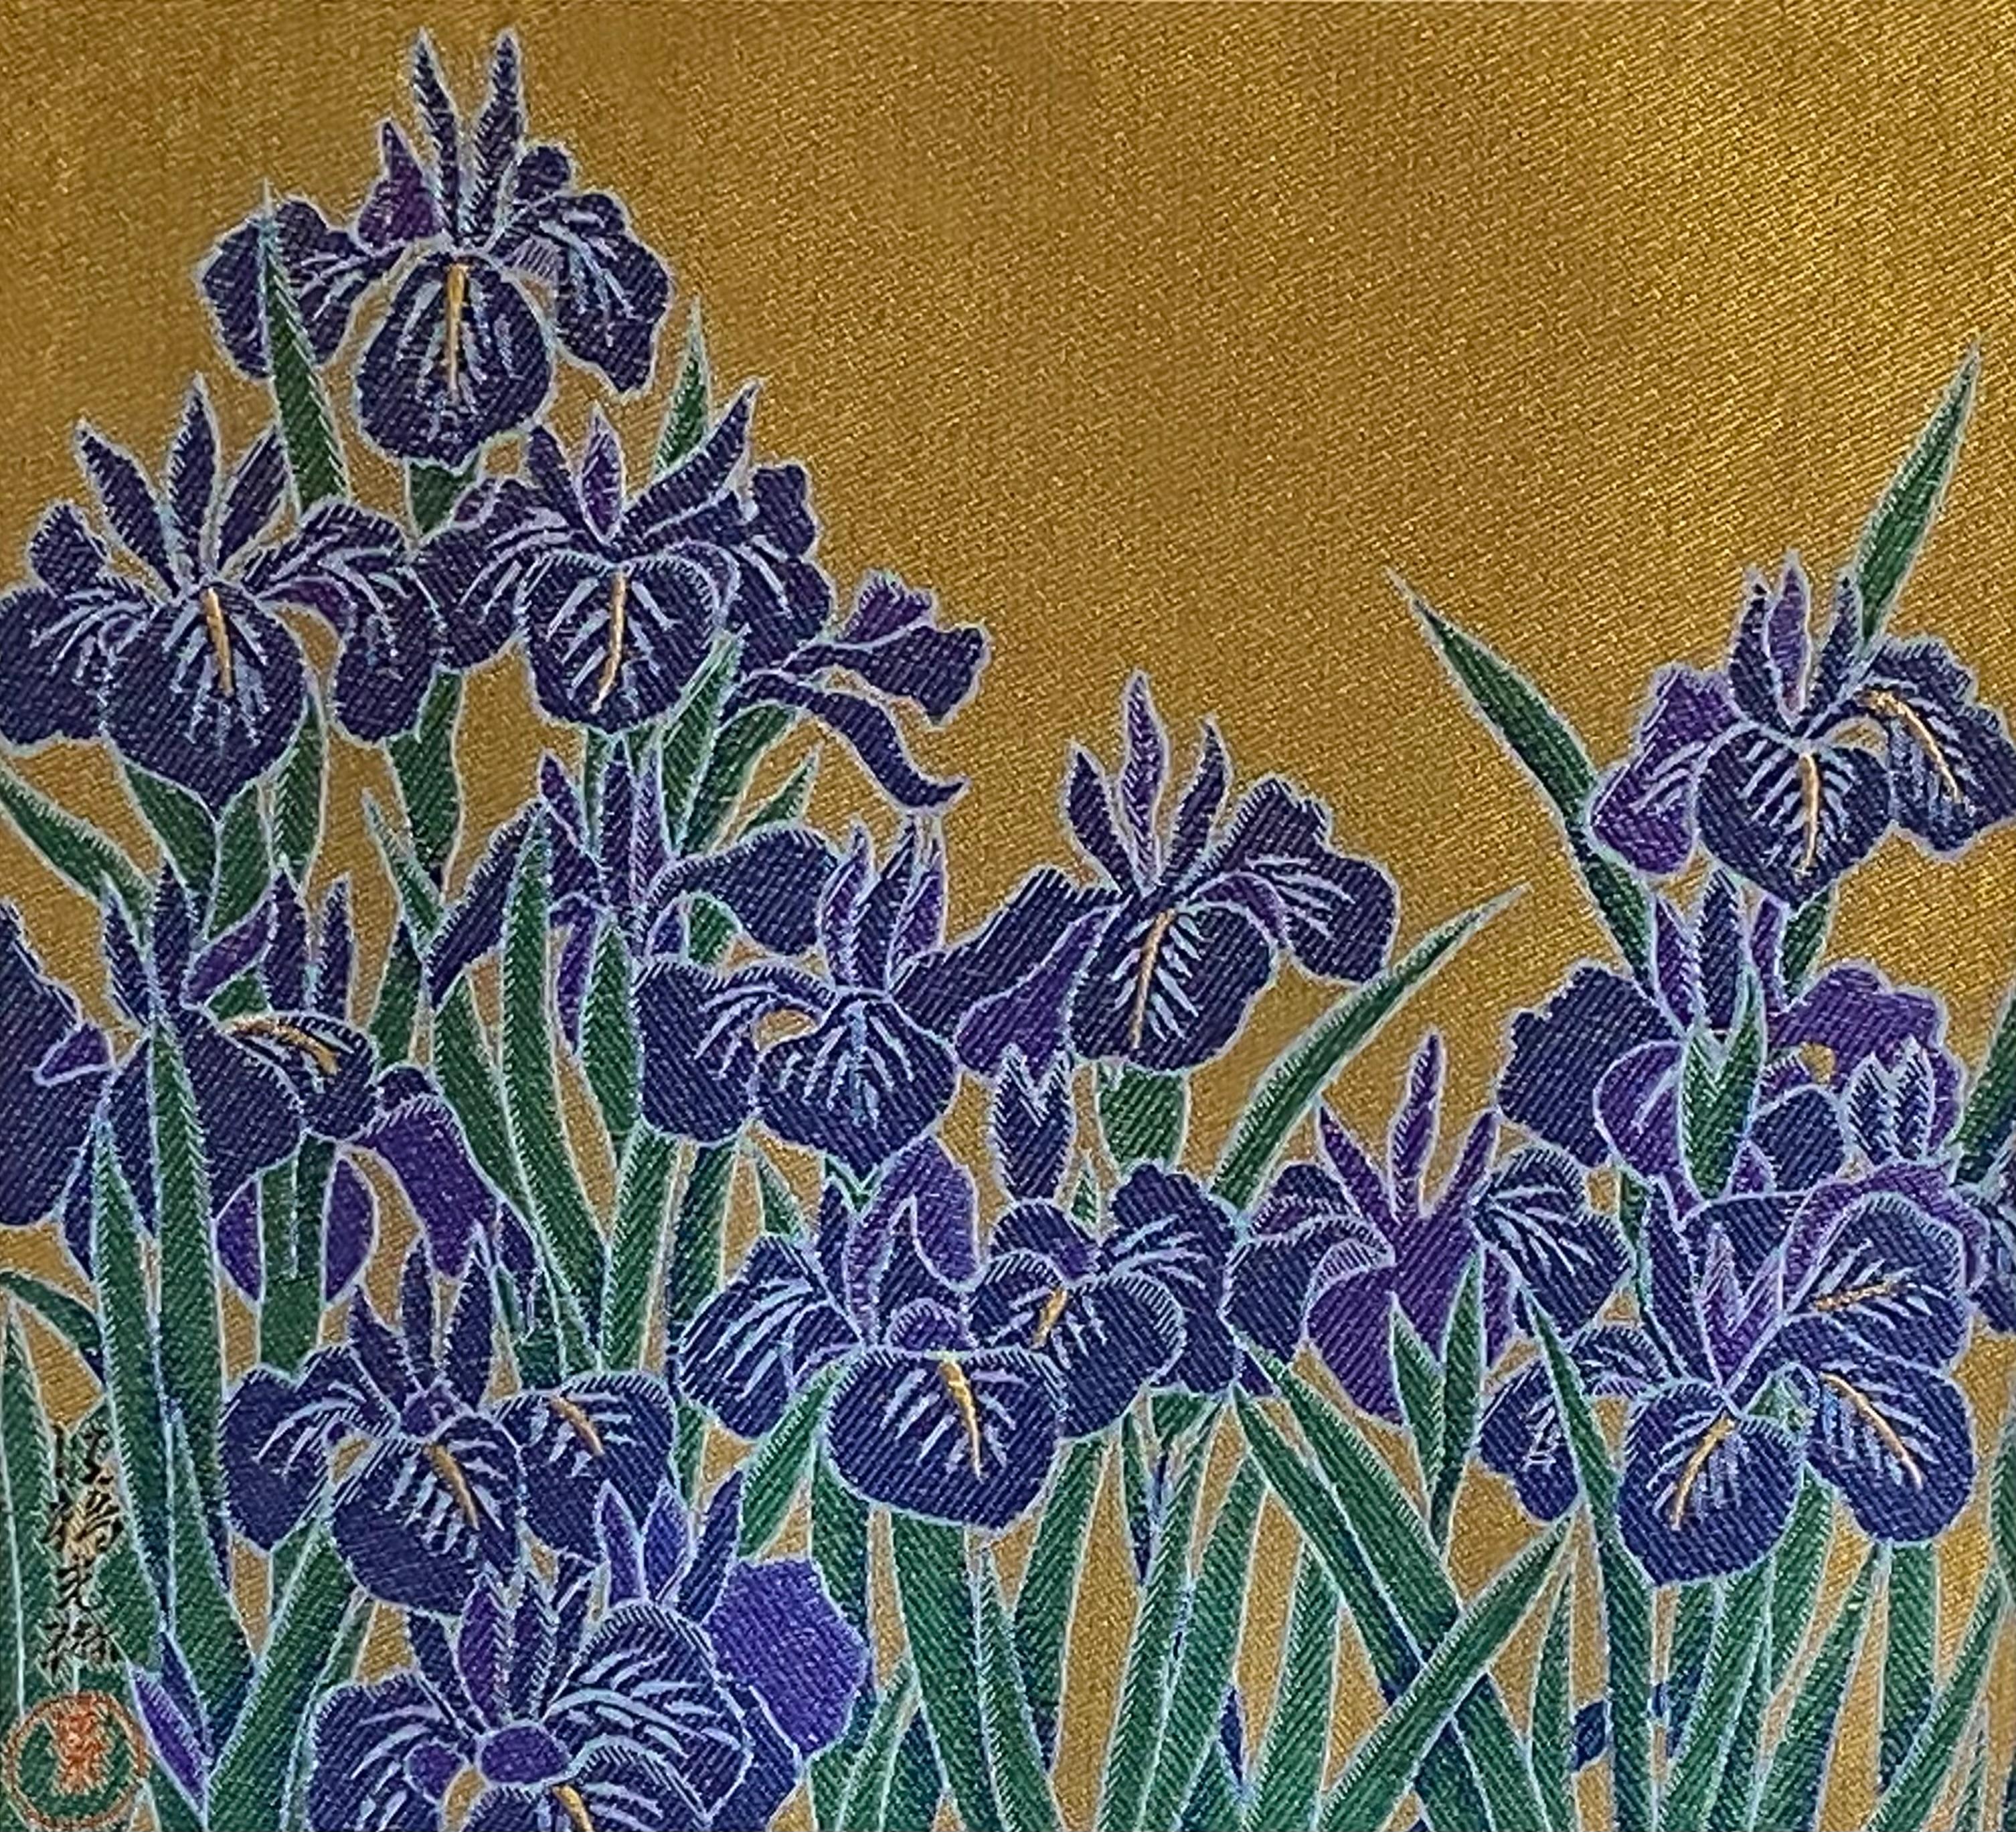 “Irises” - Contemporary Art by Unknown